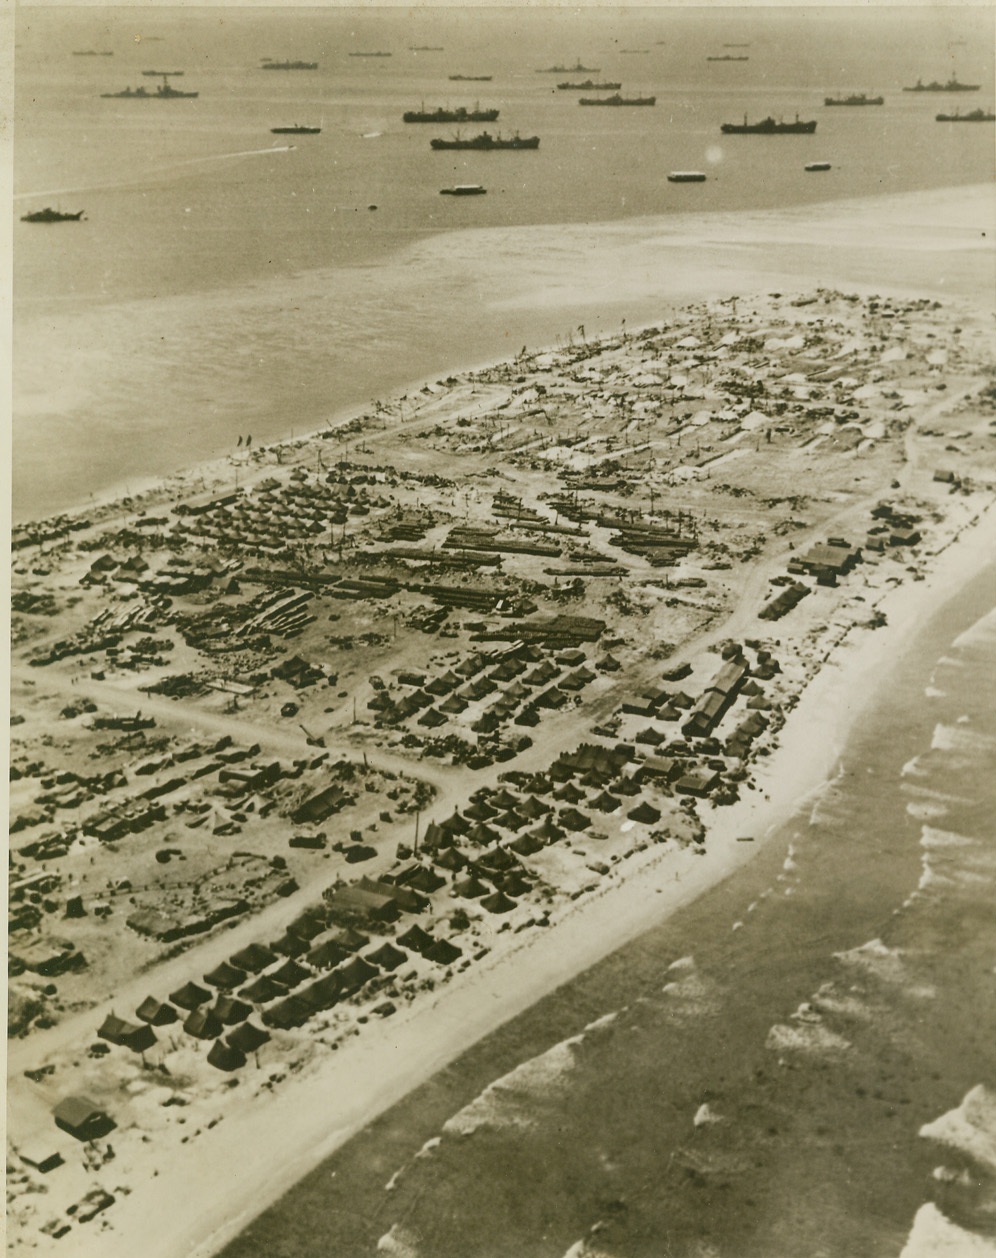 YANKS REBUILD KWAJALEIN, 5/2/1944. KWAJALEIN – This aerial view of newly-conquered Kwajalein Island in the heart of the Marshalls Group shows how the U.S. Navy Task Force is at work rebuilding the shell-shattered base. Rows of tents house Seabees, whose skillful efforts have already partly removed the pock-marks of war on the Atoll. Part of the Navy Task Force can be seen anchored offshore. Credit: U.S. Navy photo via OWI Radiophoto from ACME;